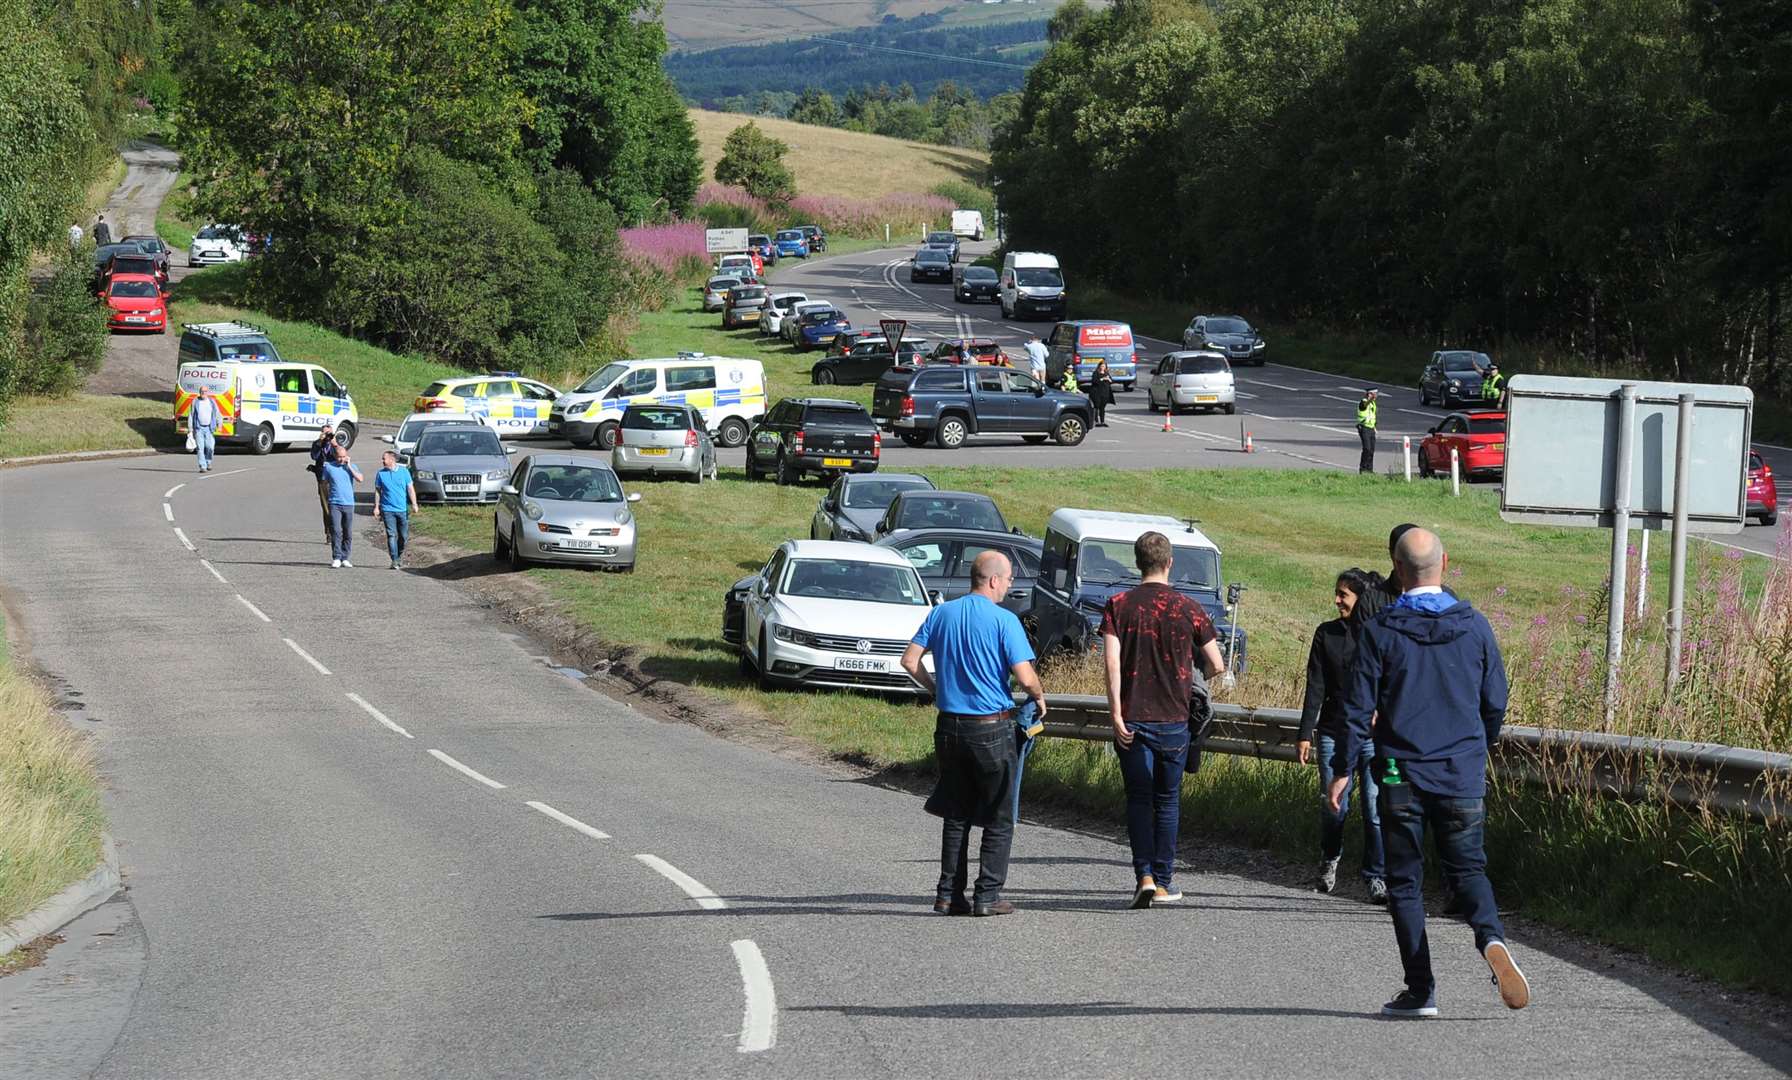 Police had to deal with traffic and the A941 as people waited to try to access Macallan Distillery in August to buy a limited edition release. Picture: Eric Cormack/SPP